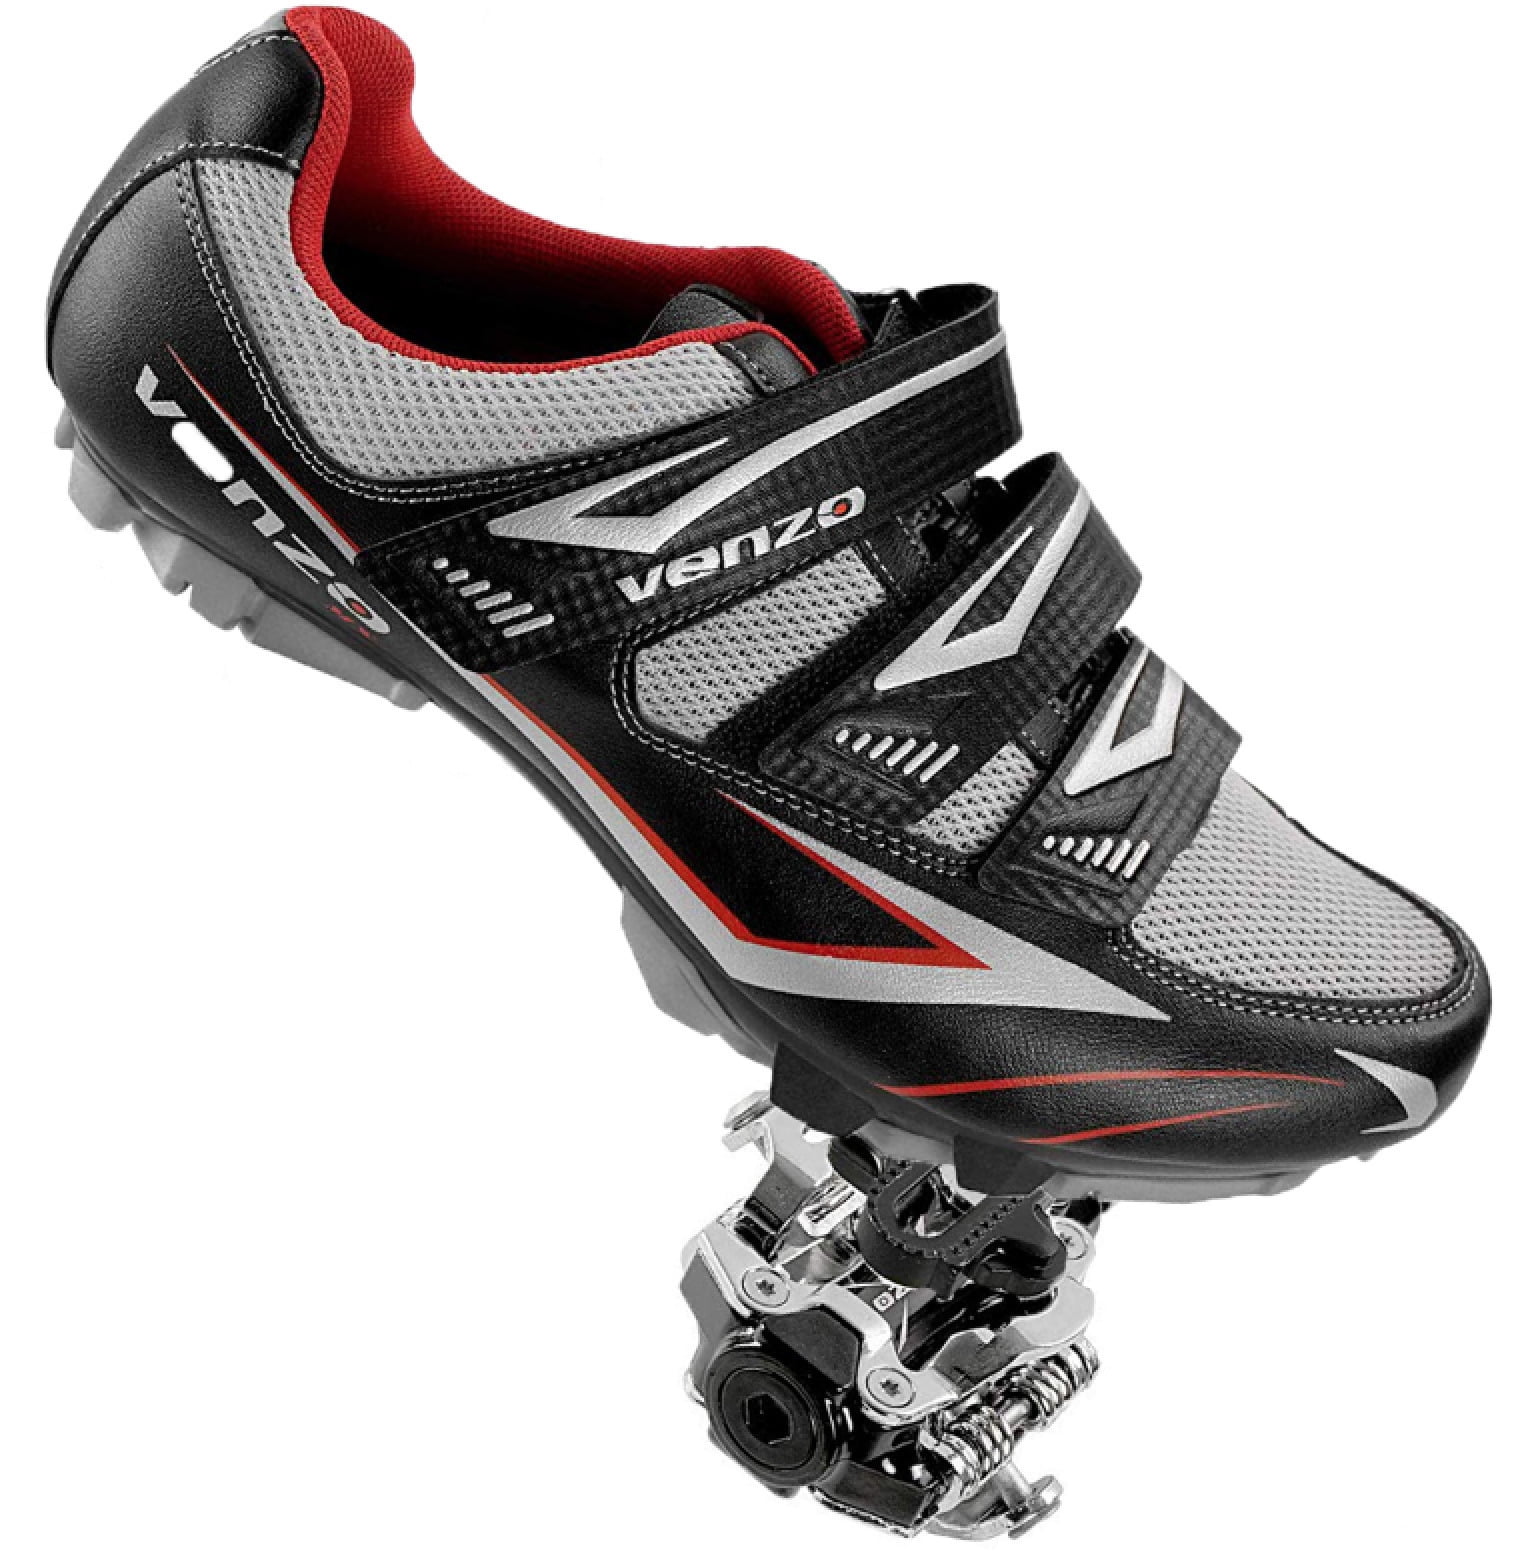 Venzo Mountain Bike Bicycle Cycling Shimano SPD Shoes Pedals & Cleats 